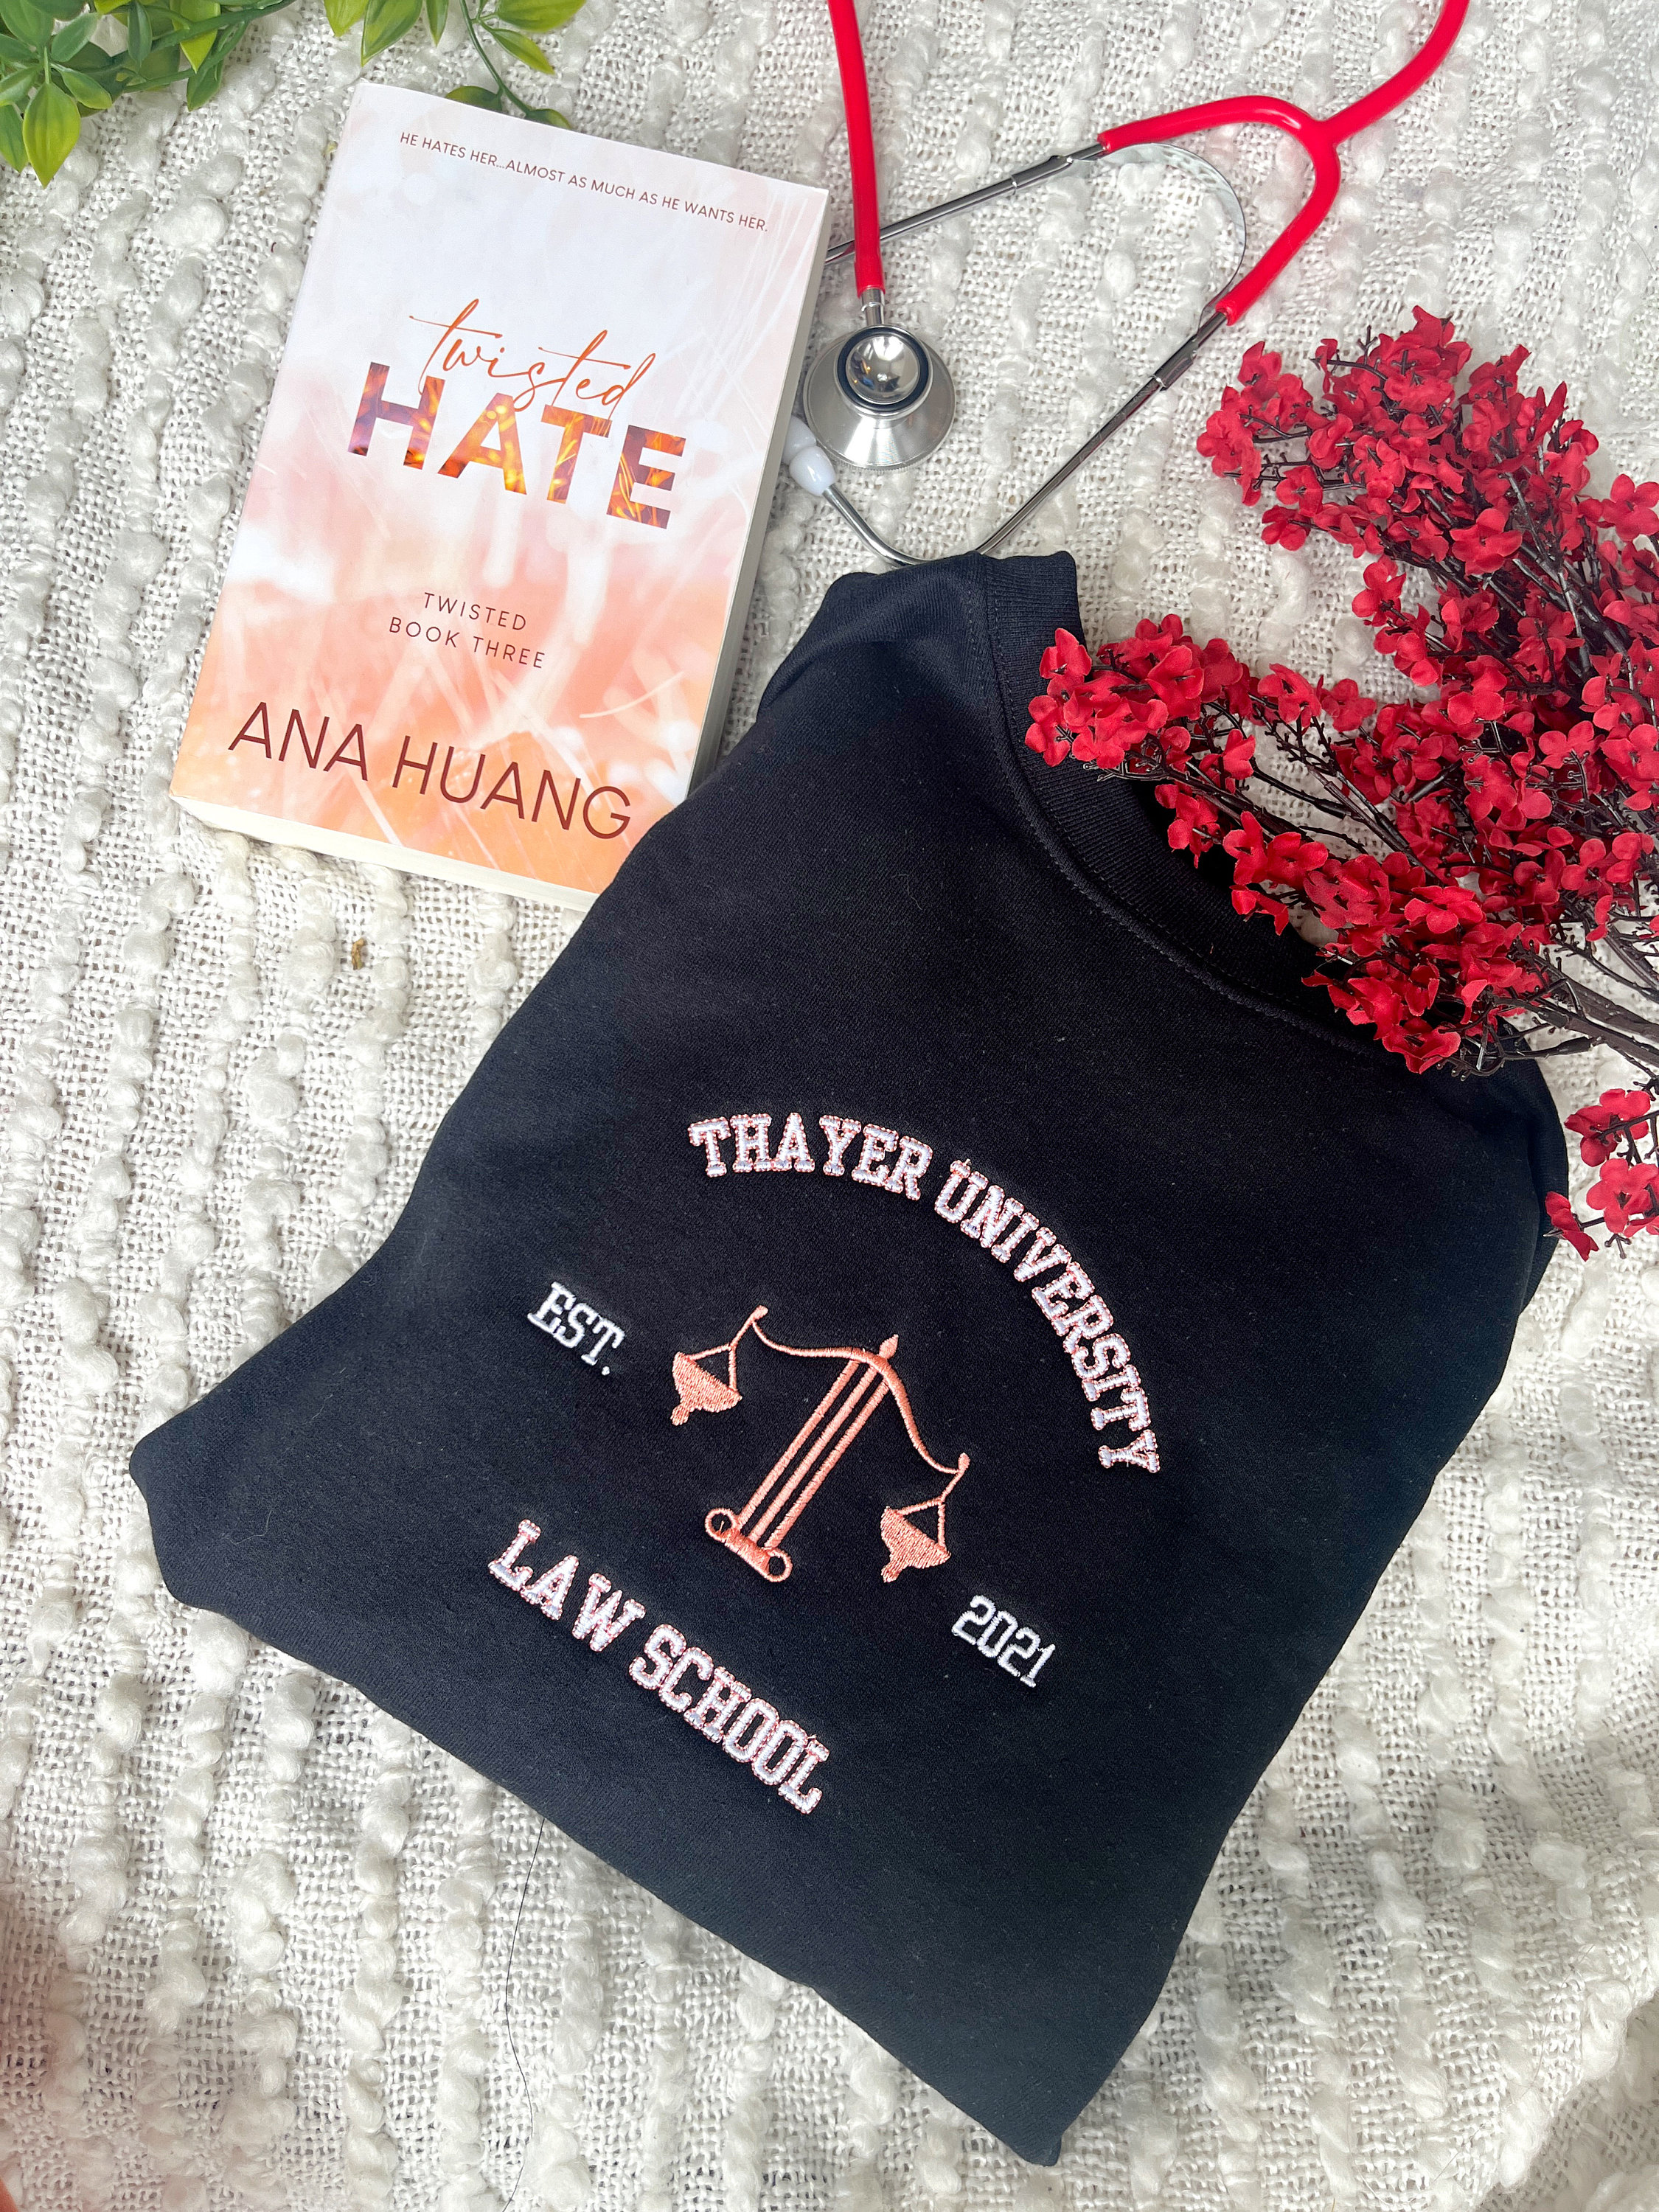 Twisted Hate Sweatshirt/ Thayer University Merch / Twisted Series Merch /  LICENSED Ana Huang Merch / Embroidered Book Sweatshirt 